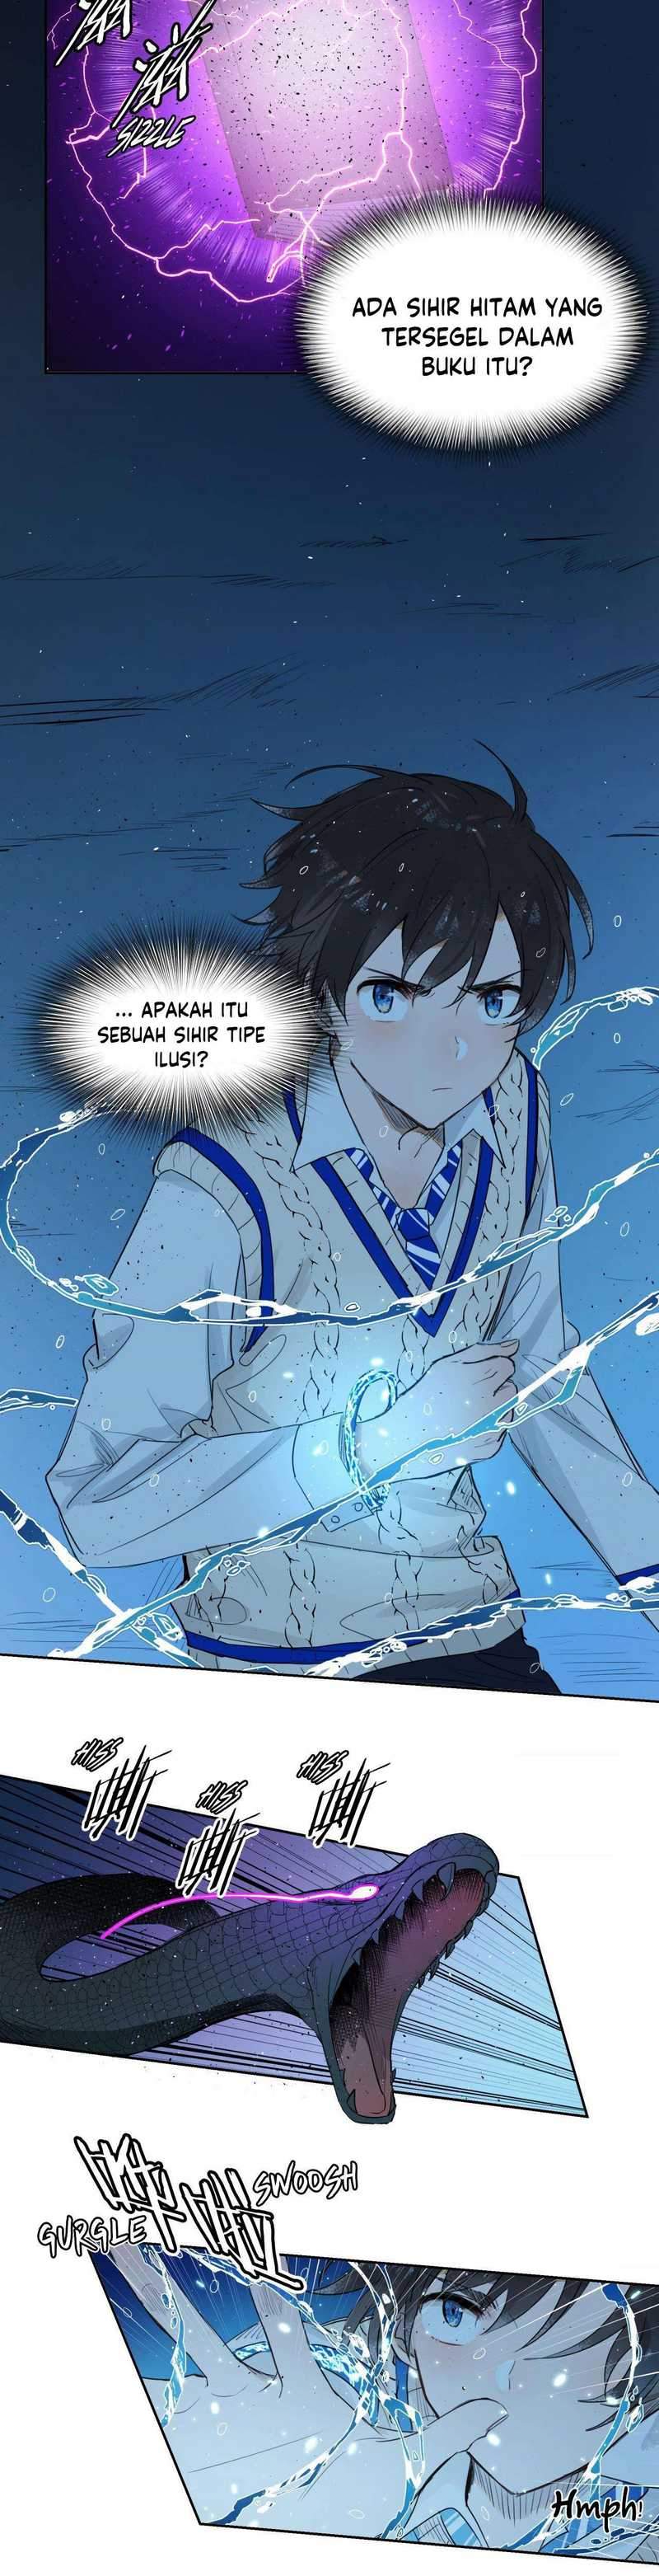 My Lord of the Sea, Please Do Your Work! Chapter 01 21